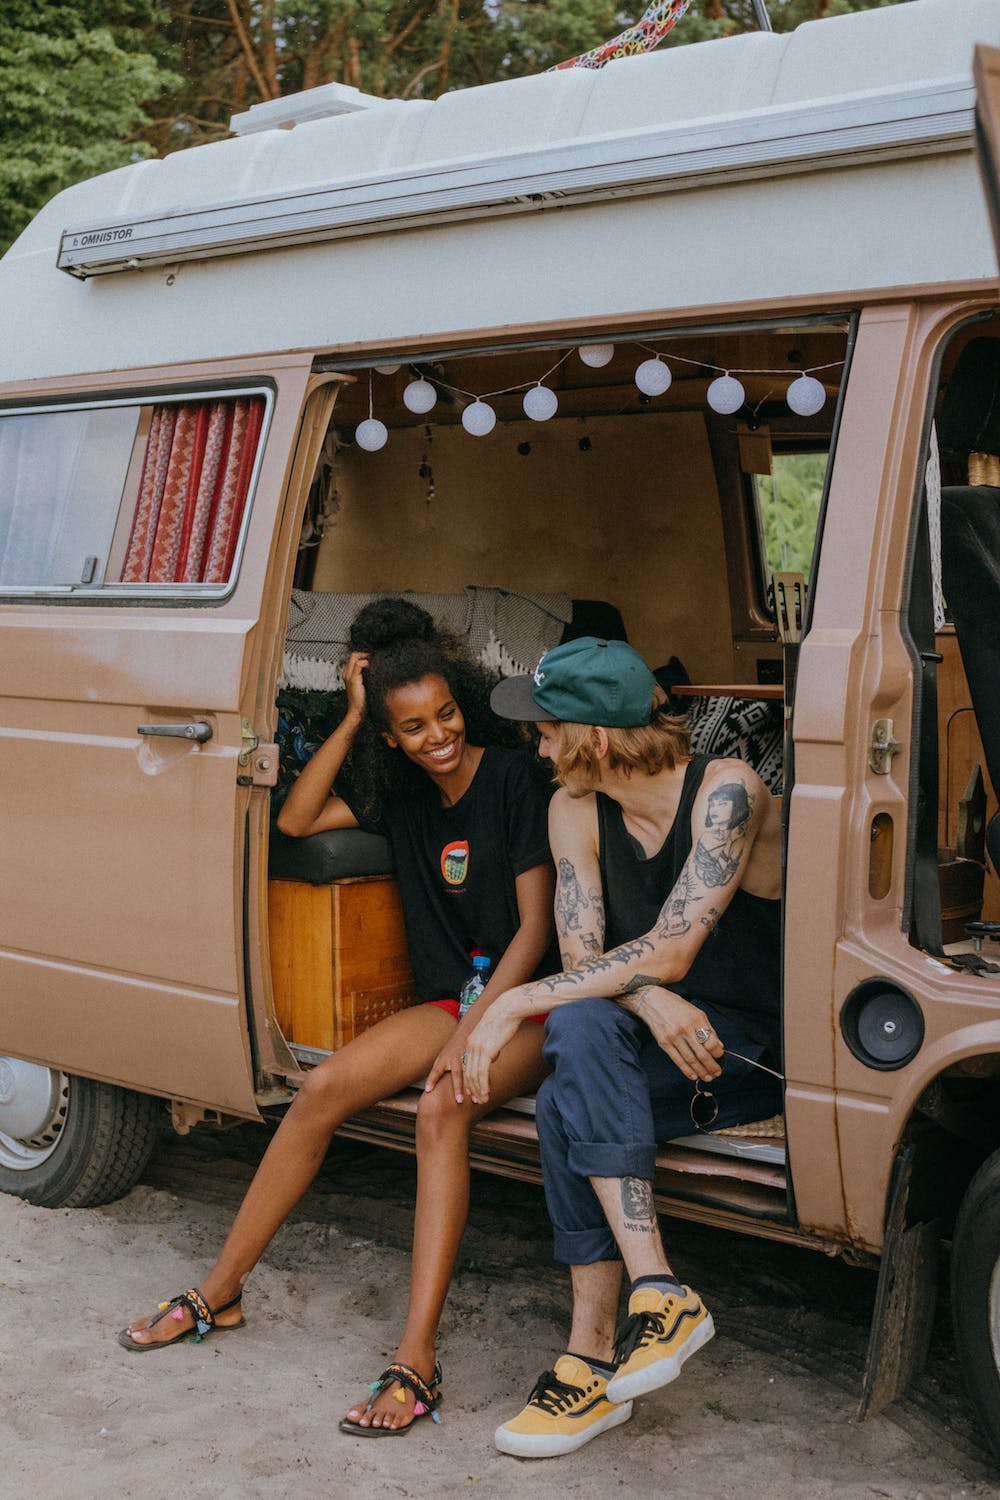 Couple in Van - How to Plan a Trip